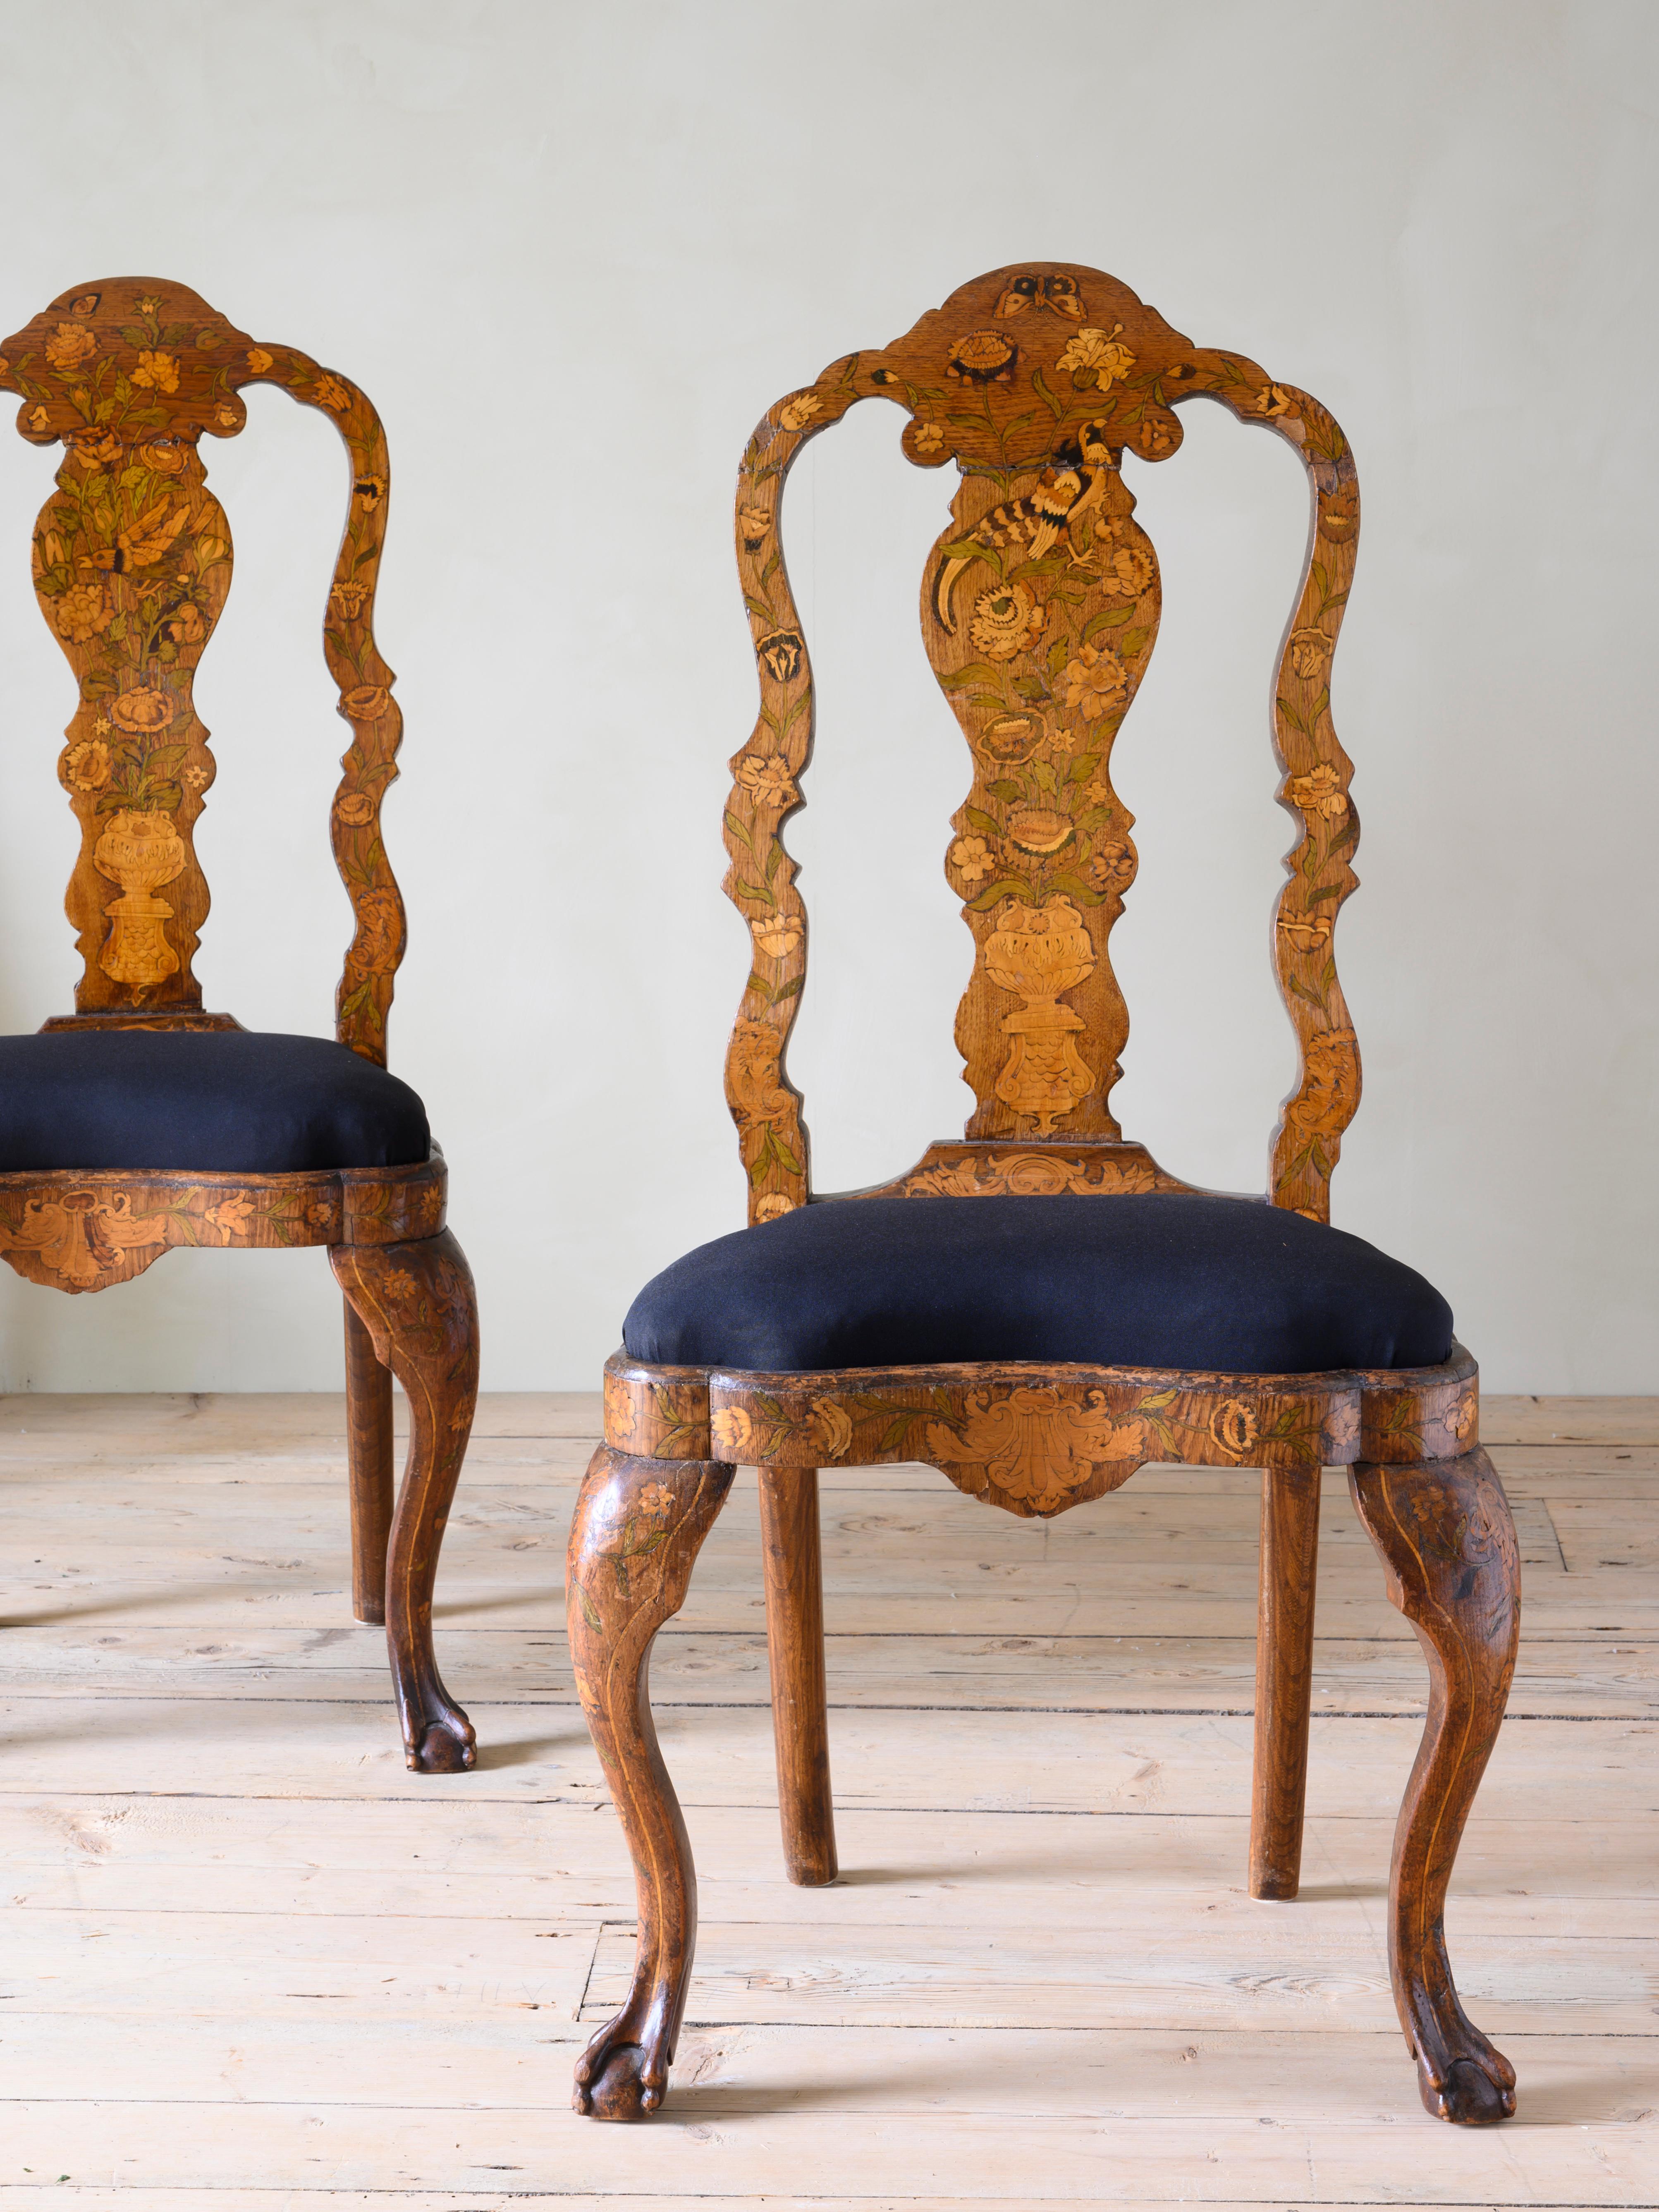 A fine set of four 18th century Dutch marquetry side chairs, circa 1780 Netherlands.

Good original condition with wear consistent with age and use. Structurally good and sturdy. A detailed condition report is available on request.